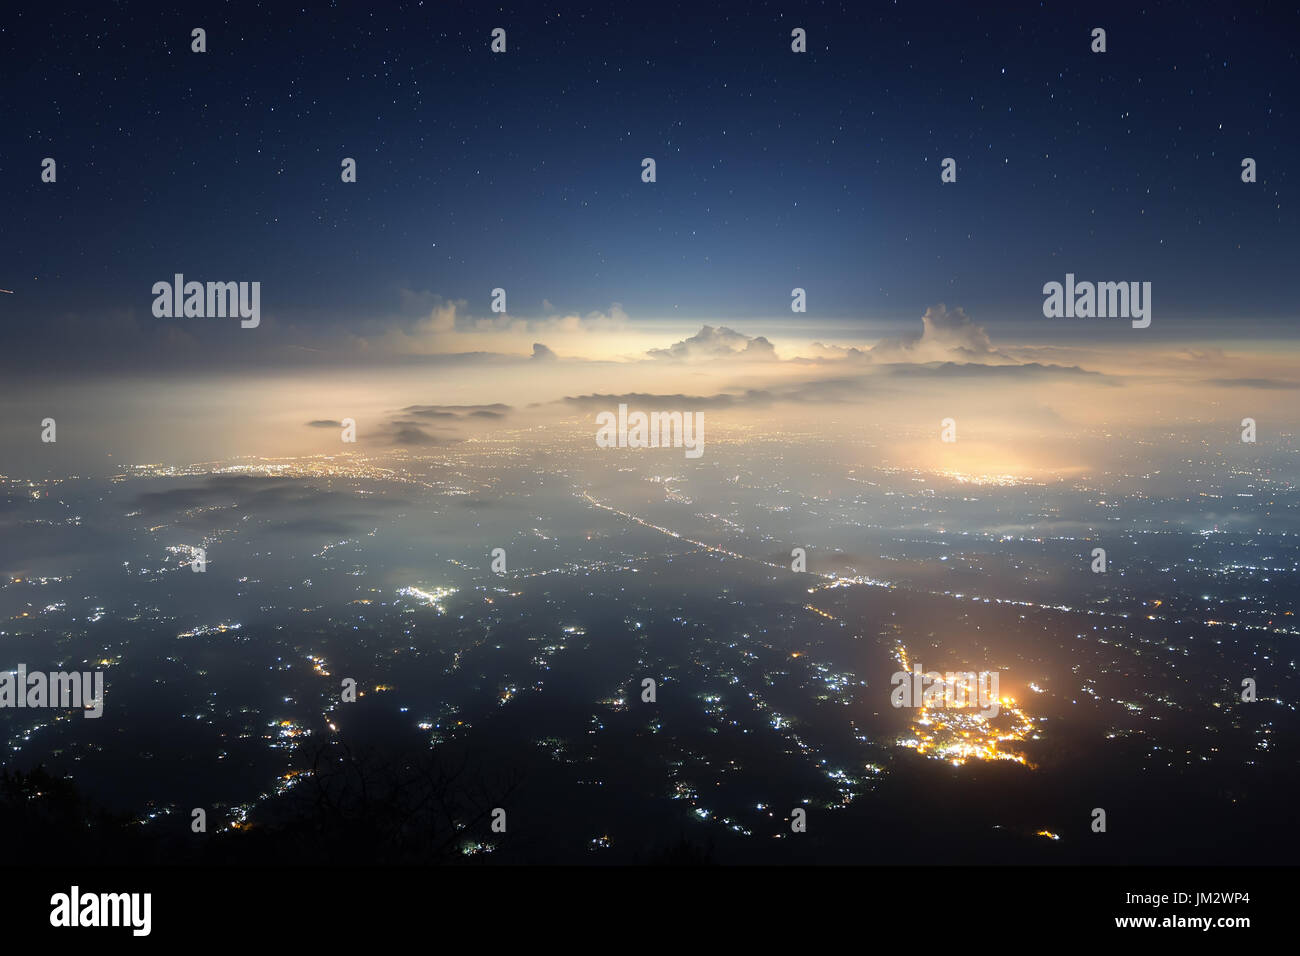 Indonesia, Bali island captured from the top of Agung volcano (3,142 m) in the night. Stock Photo